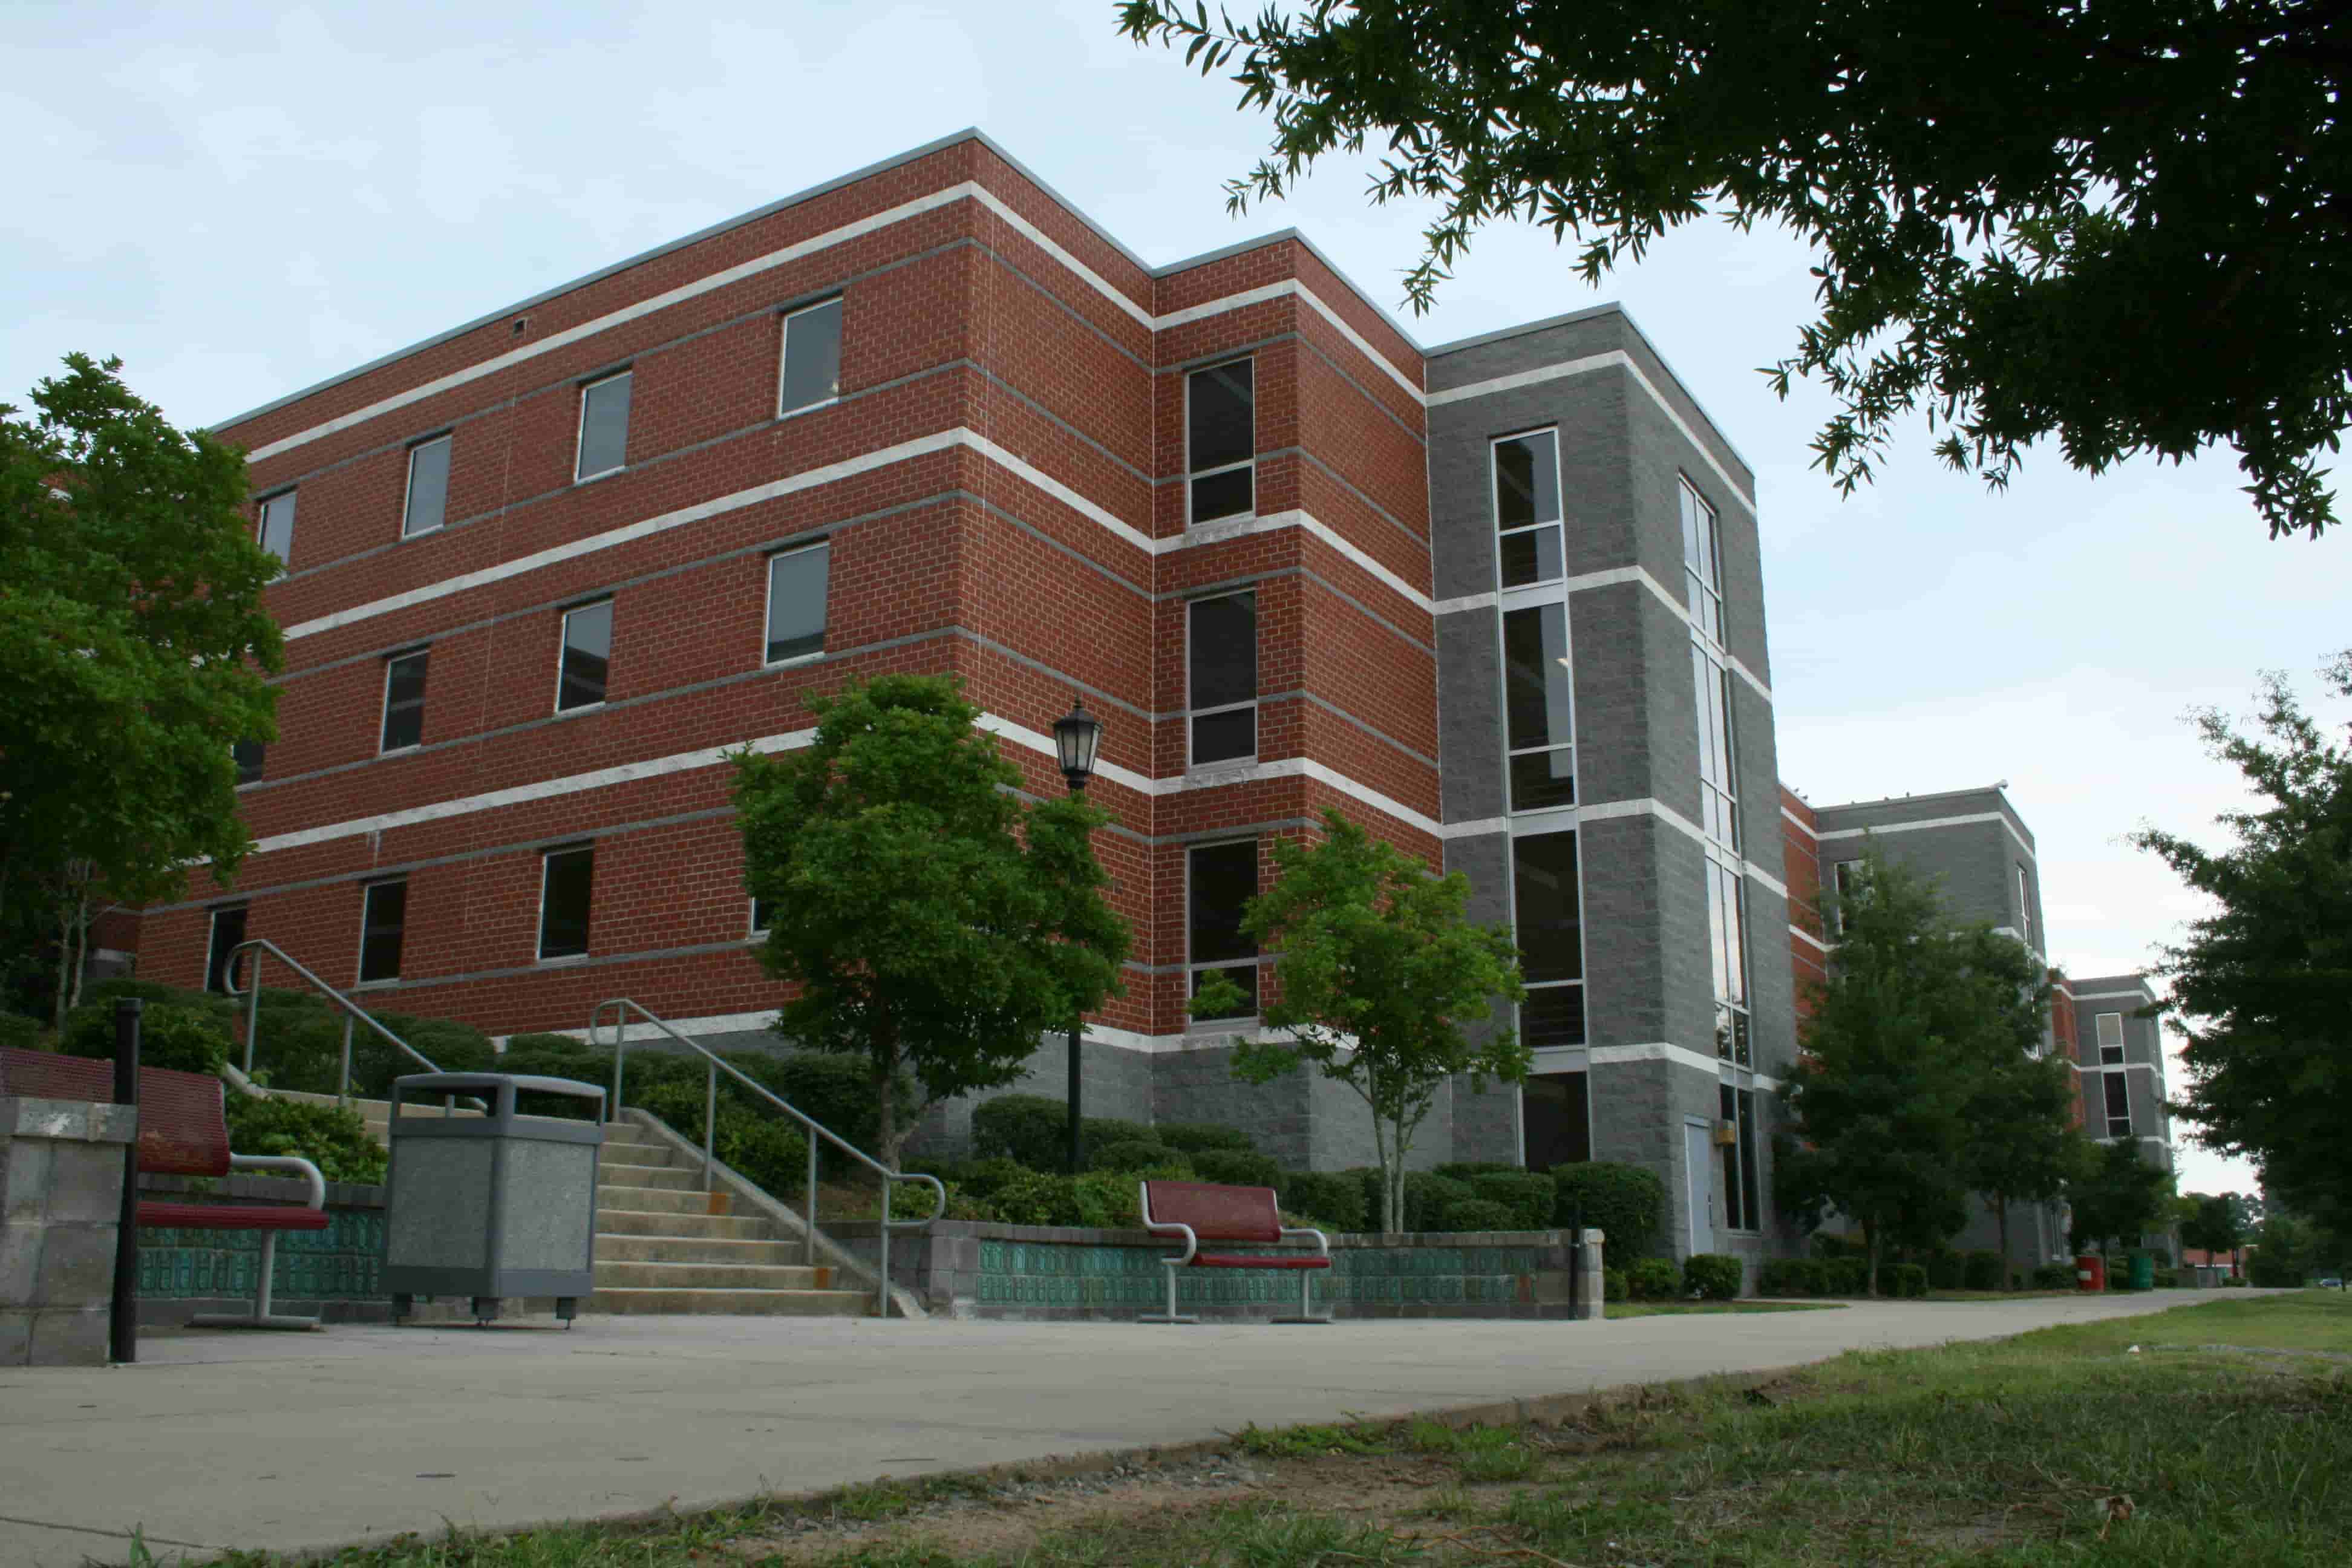 The view of New Residence Hall II Building